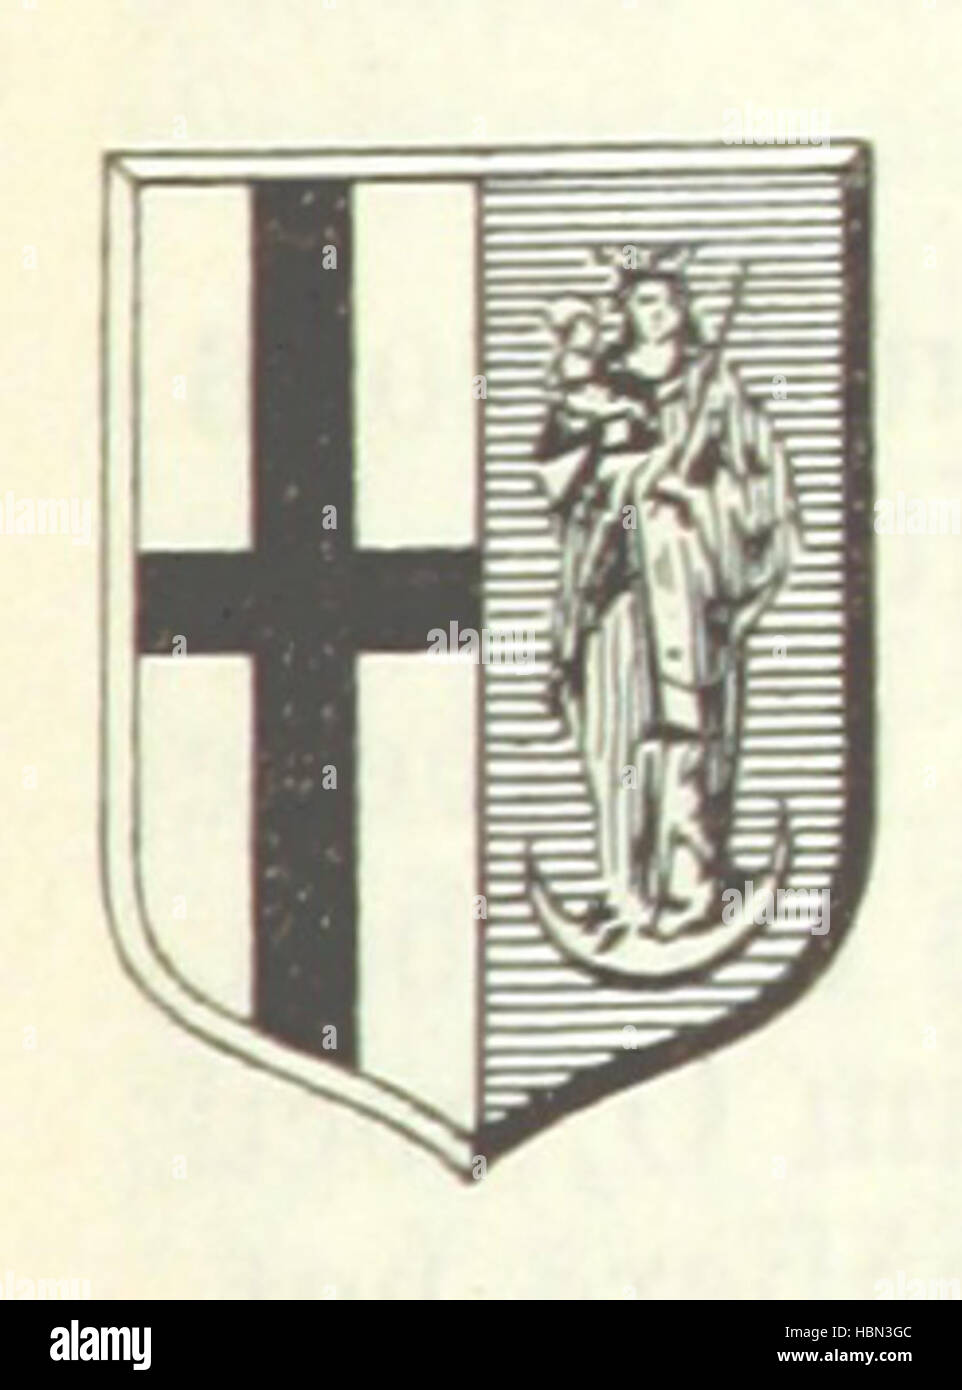 Image taken from page 727 of 'Geographisch-historisches Handbuch von Bayern' Image taken from page 727 of 'Geographisch-historisches Handbuch von Bayern' Stock Photo